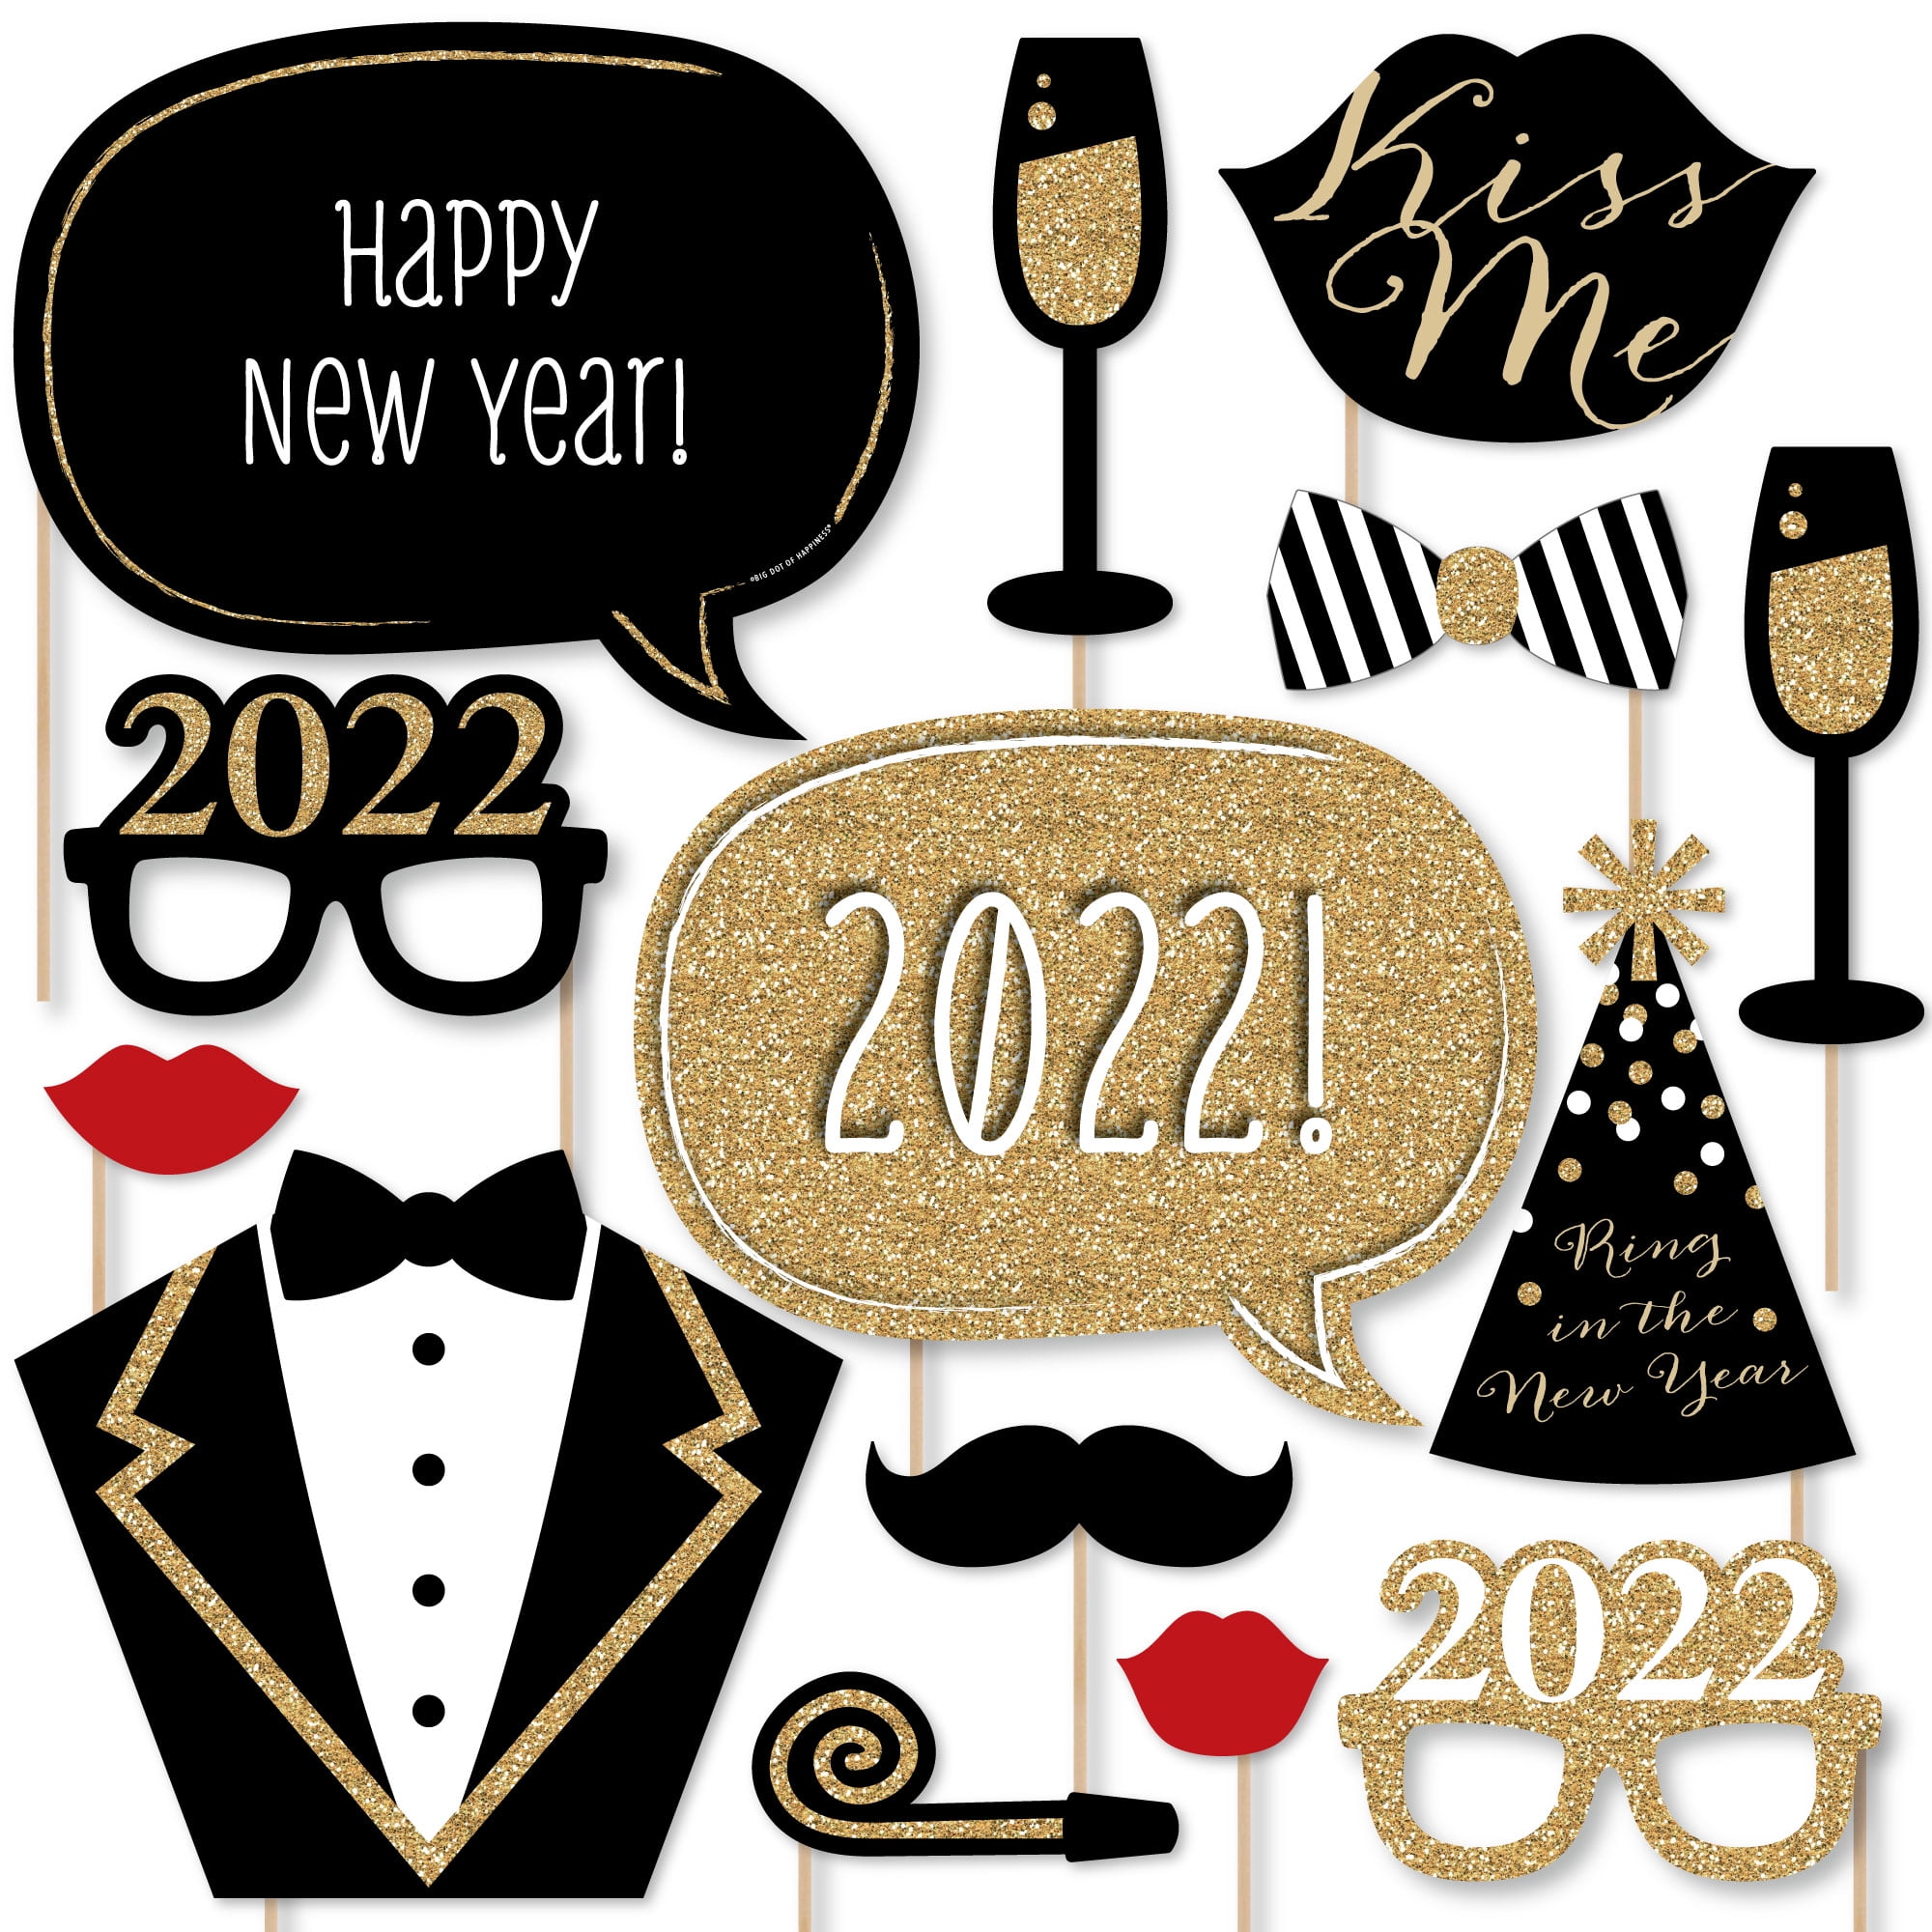 New Years Eve Party Supplies 2021,Happy New Year Party Decorations Kit include Happy New Year Banner,2021 Gold Number Foil Balloons,Cupcake Toppers and Wrappers,Chocolate Stickers and Ballons Kits for New Years Eve Party